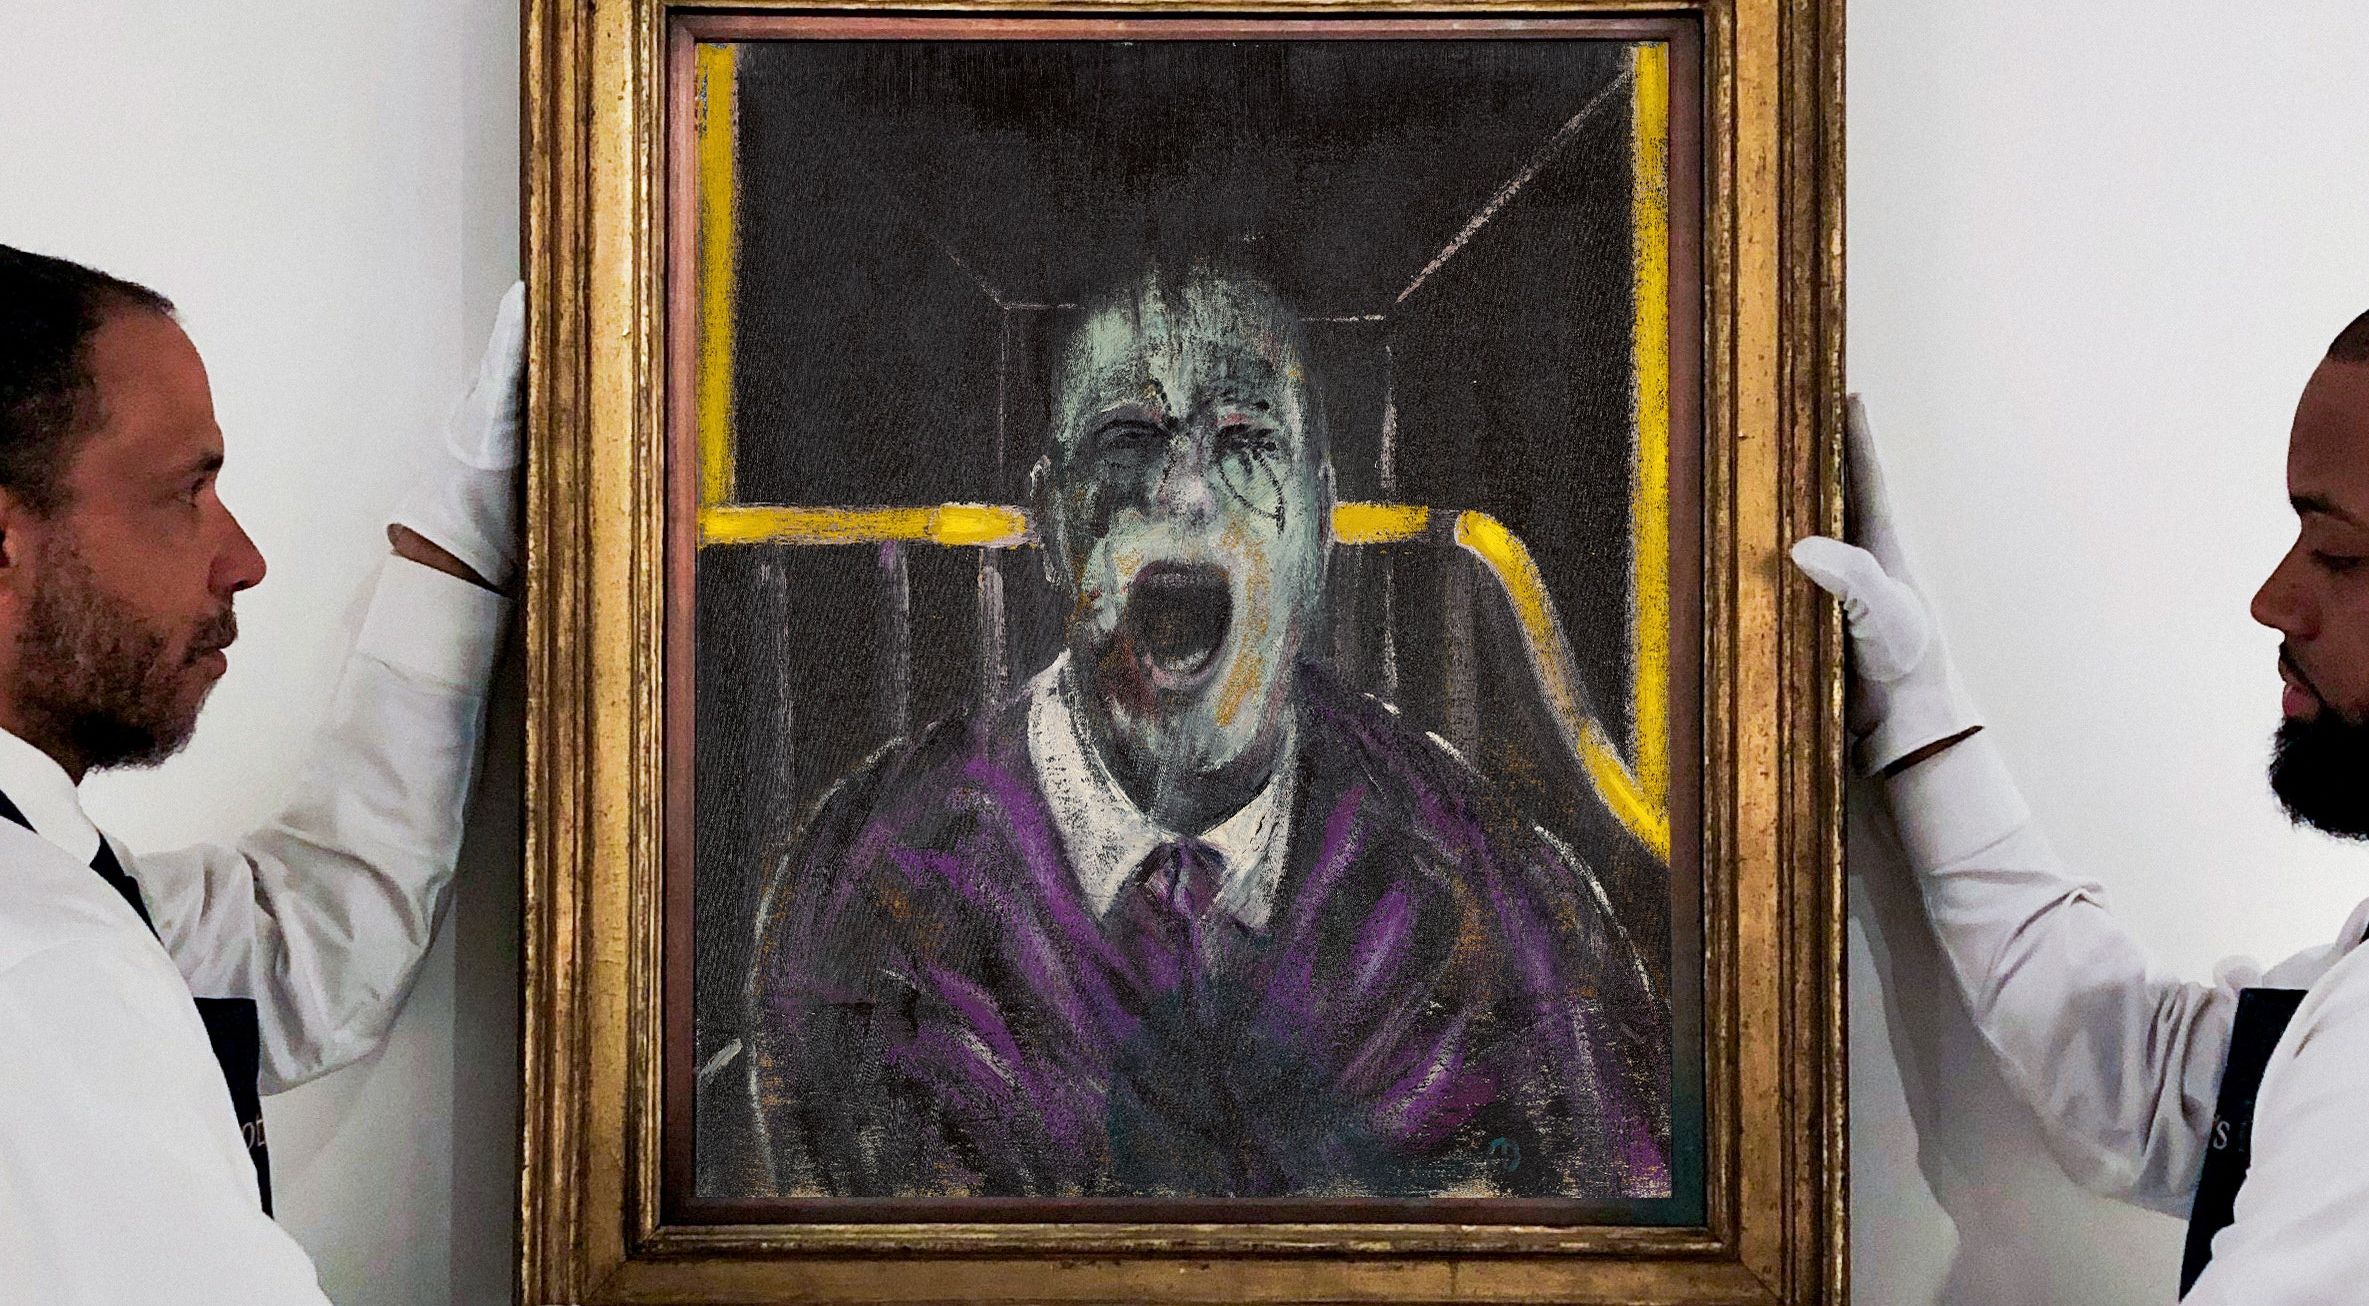 One of Francis Bacon's 'screaming popes' sells at auction for £39m